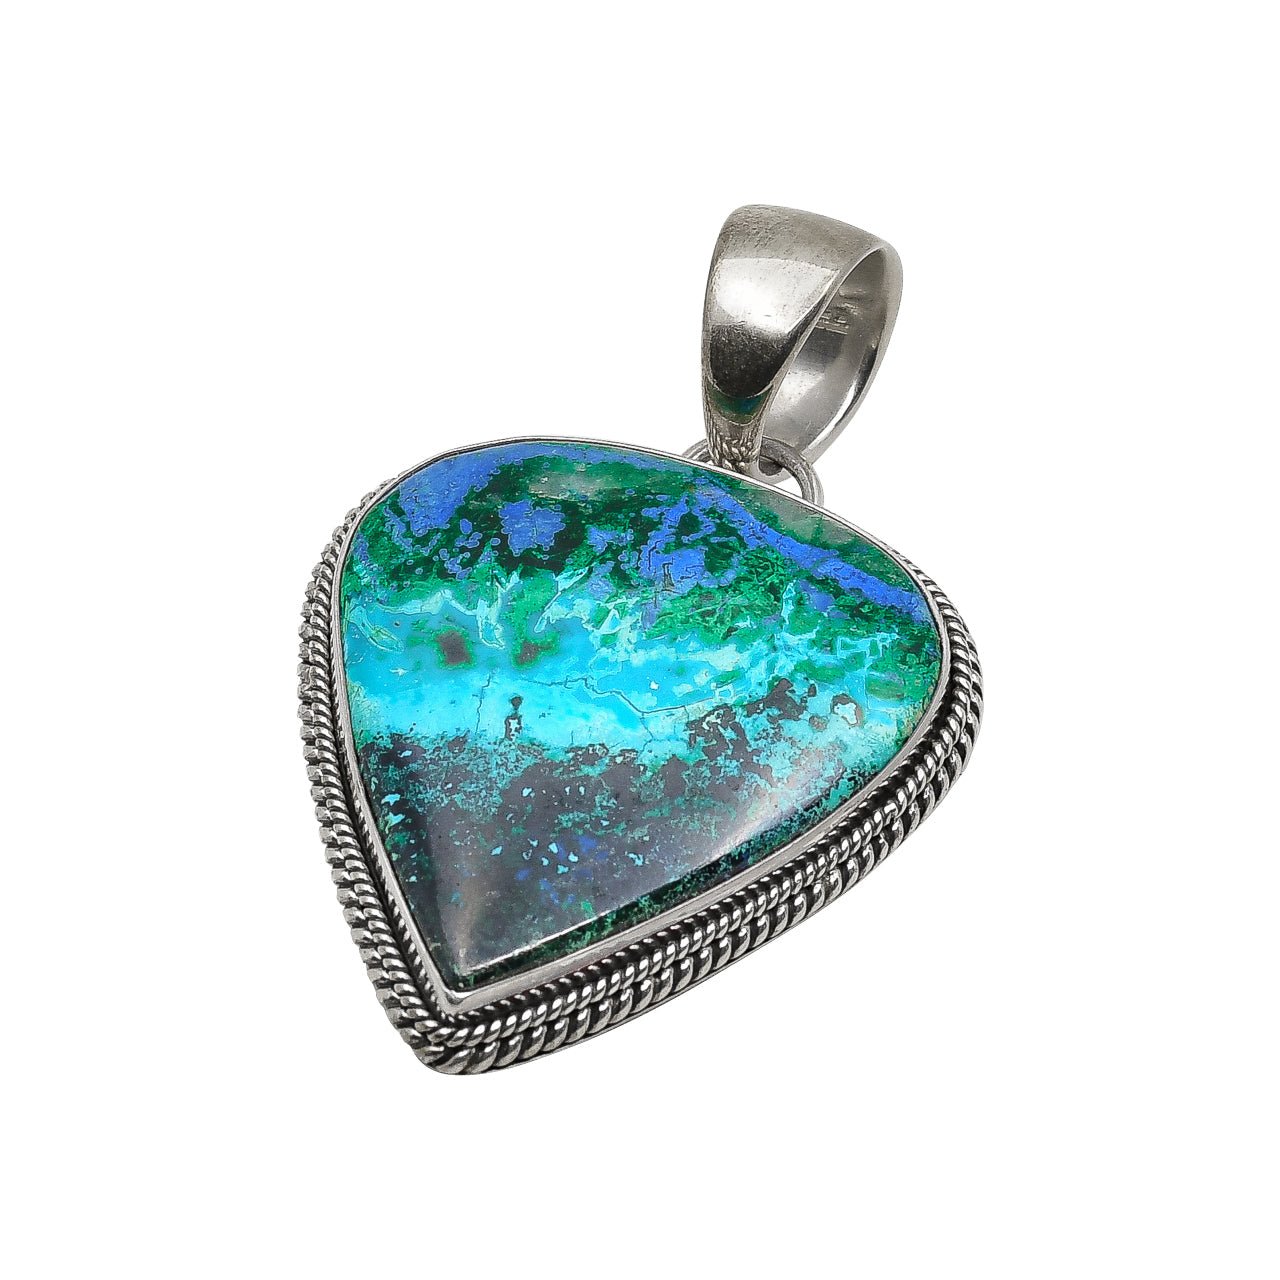 Artie Yellowhorse Pendant of Chrysocolla and Sterling Silver - Turquoise & Tufa